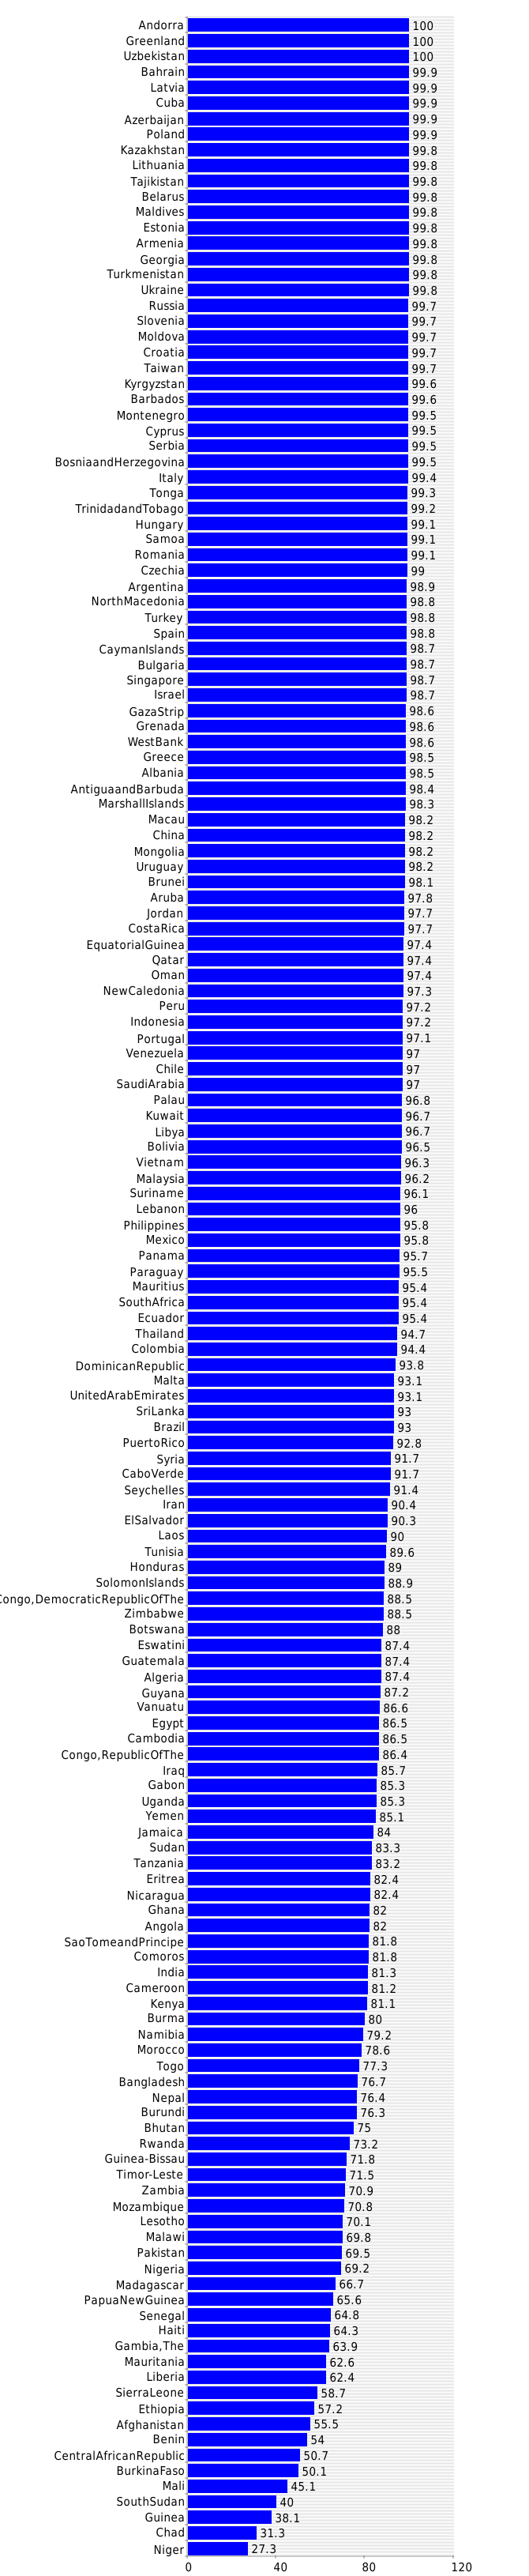  Literacy - male (%) 2020 country comparisons, ranks, by Rank 